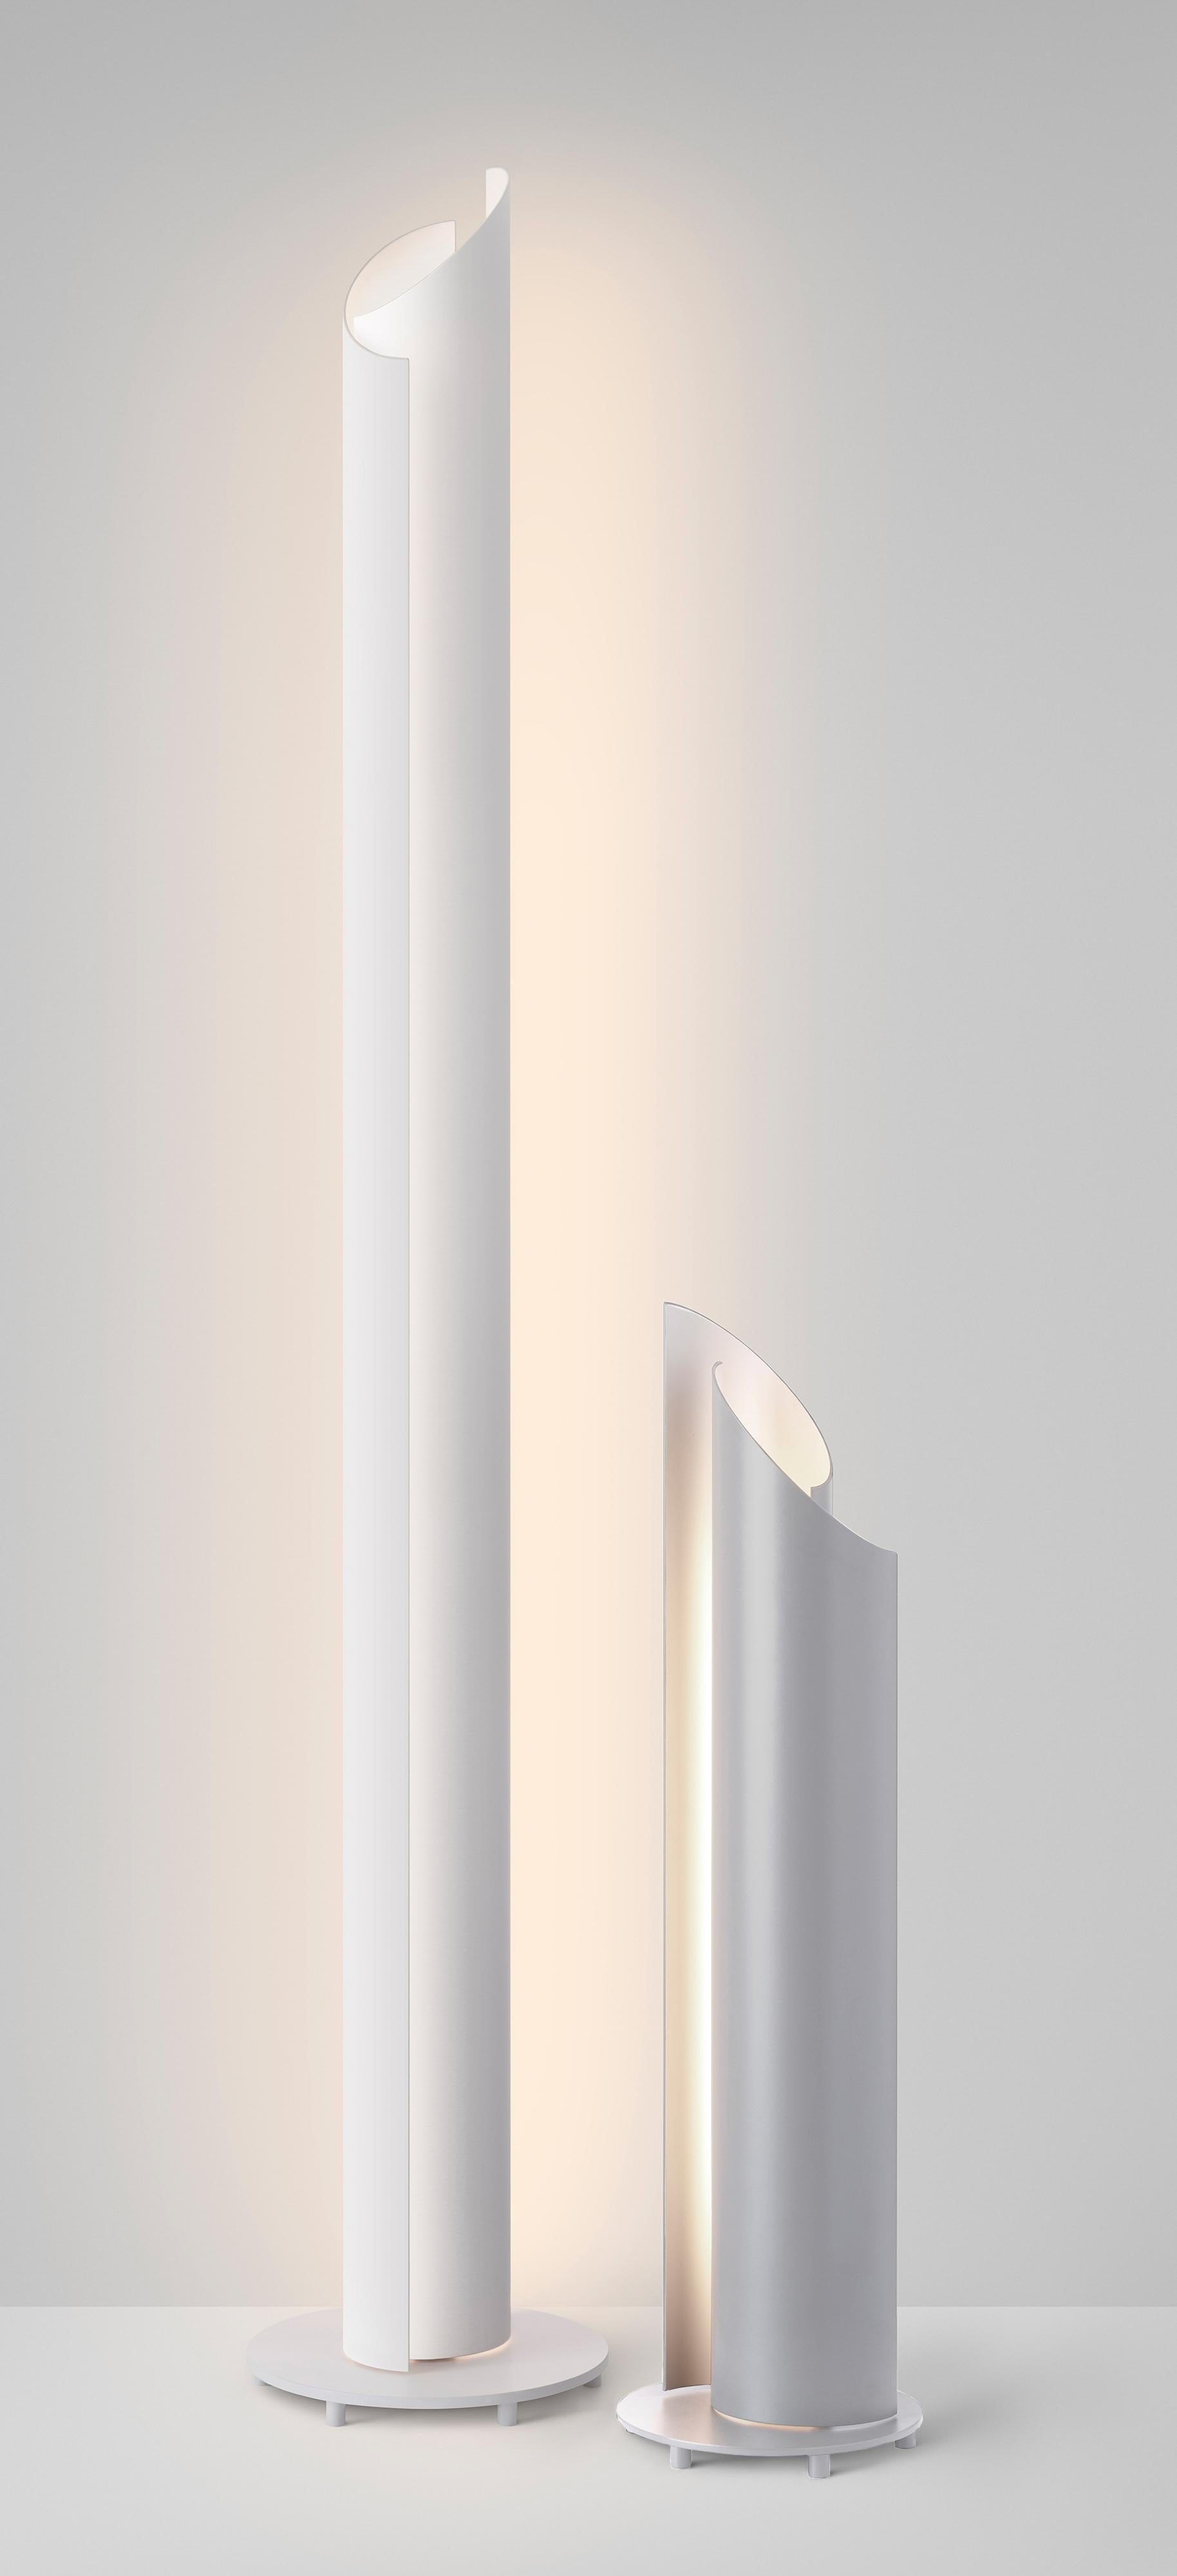 The new Vella series is a dynamic family of luminaires designed to be completely adjustable via two independently swivelling louvers, inviting the user to sculpt light and shadow. Vella’s sweeping curved aluminium form subtly captures and releases